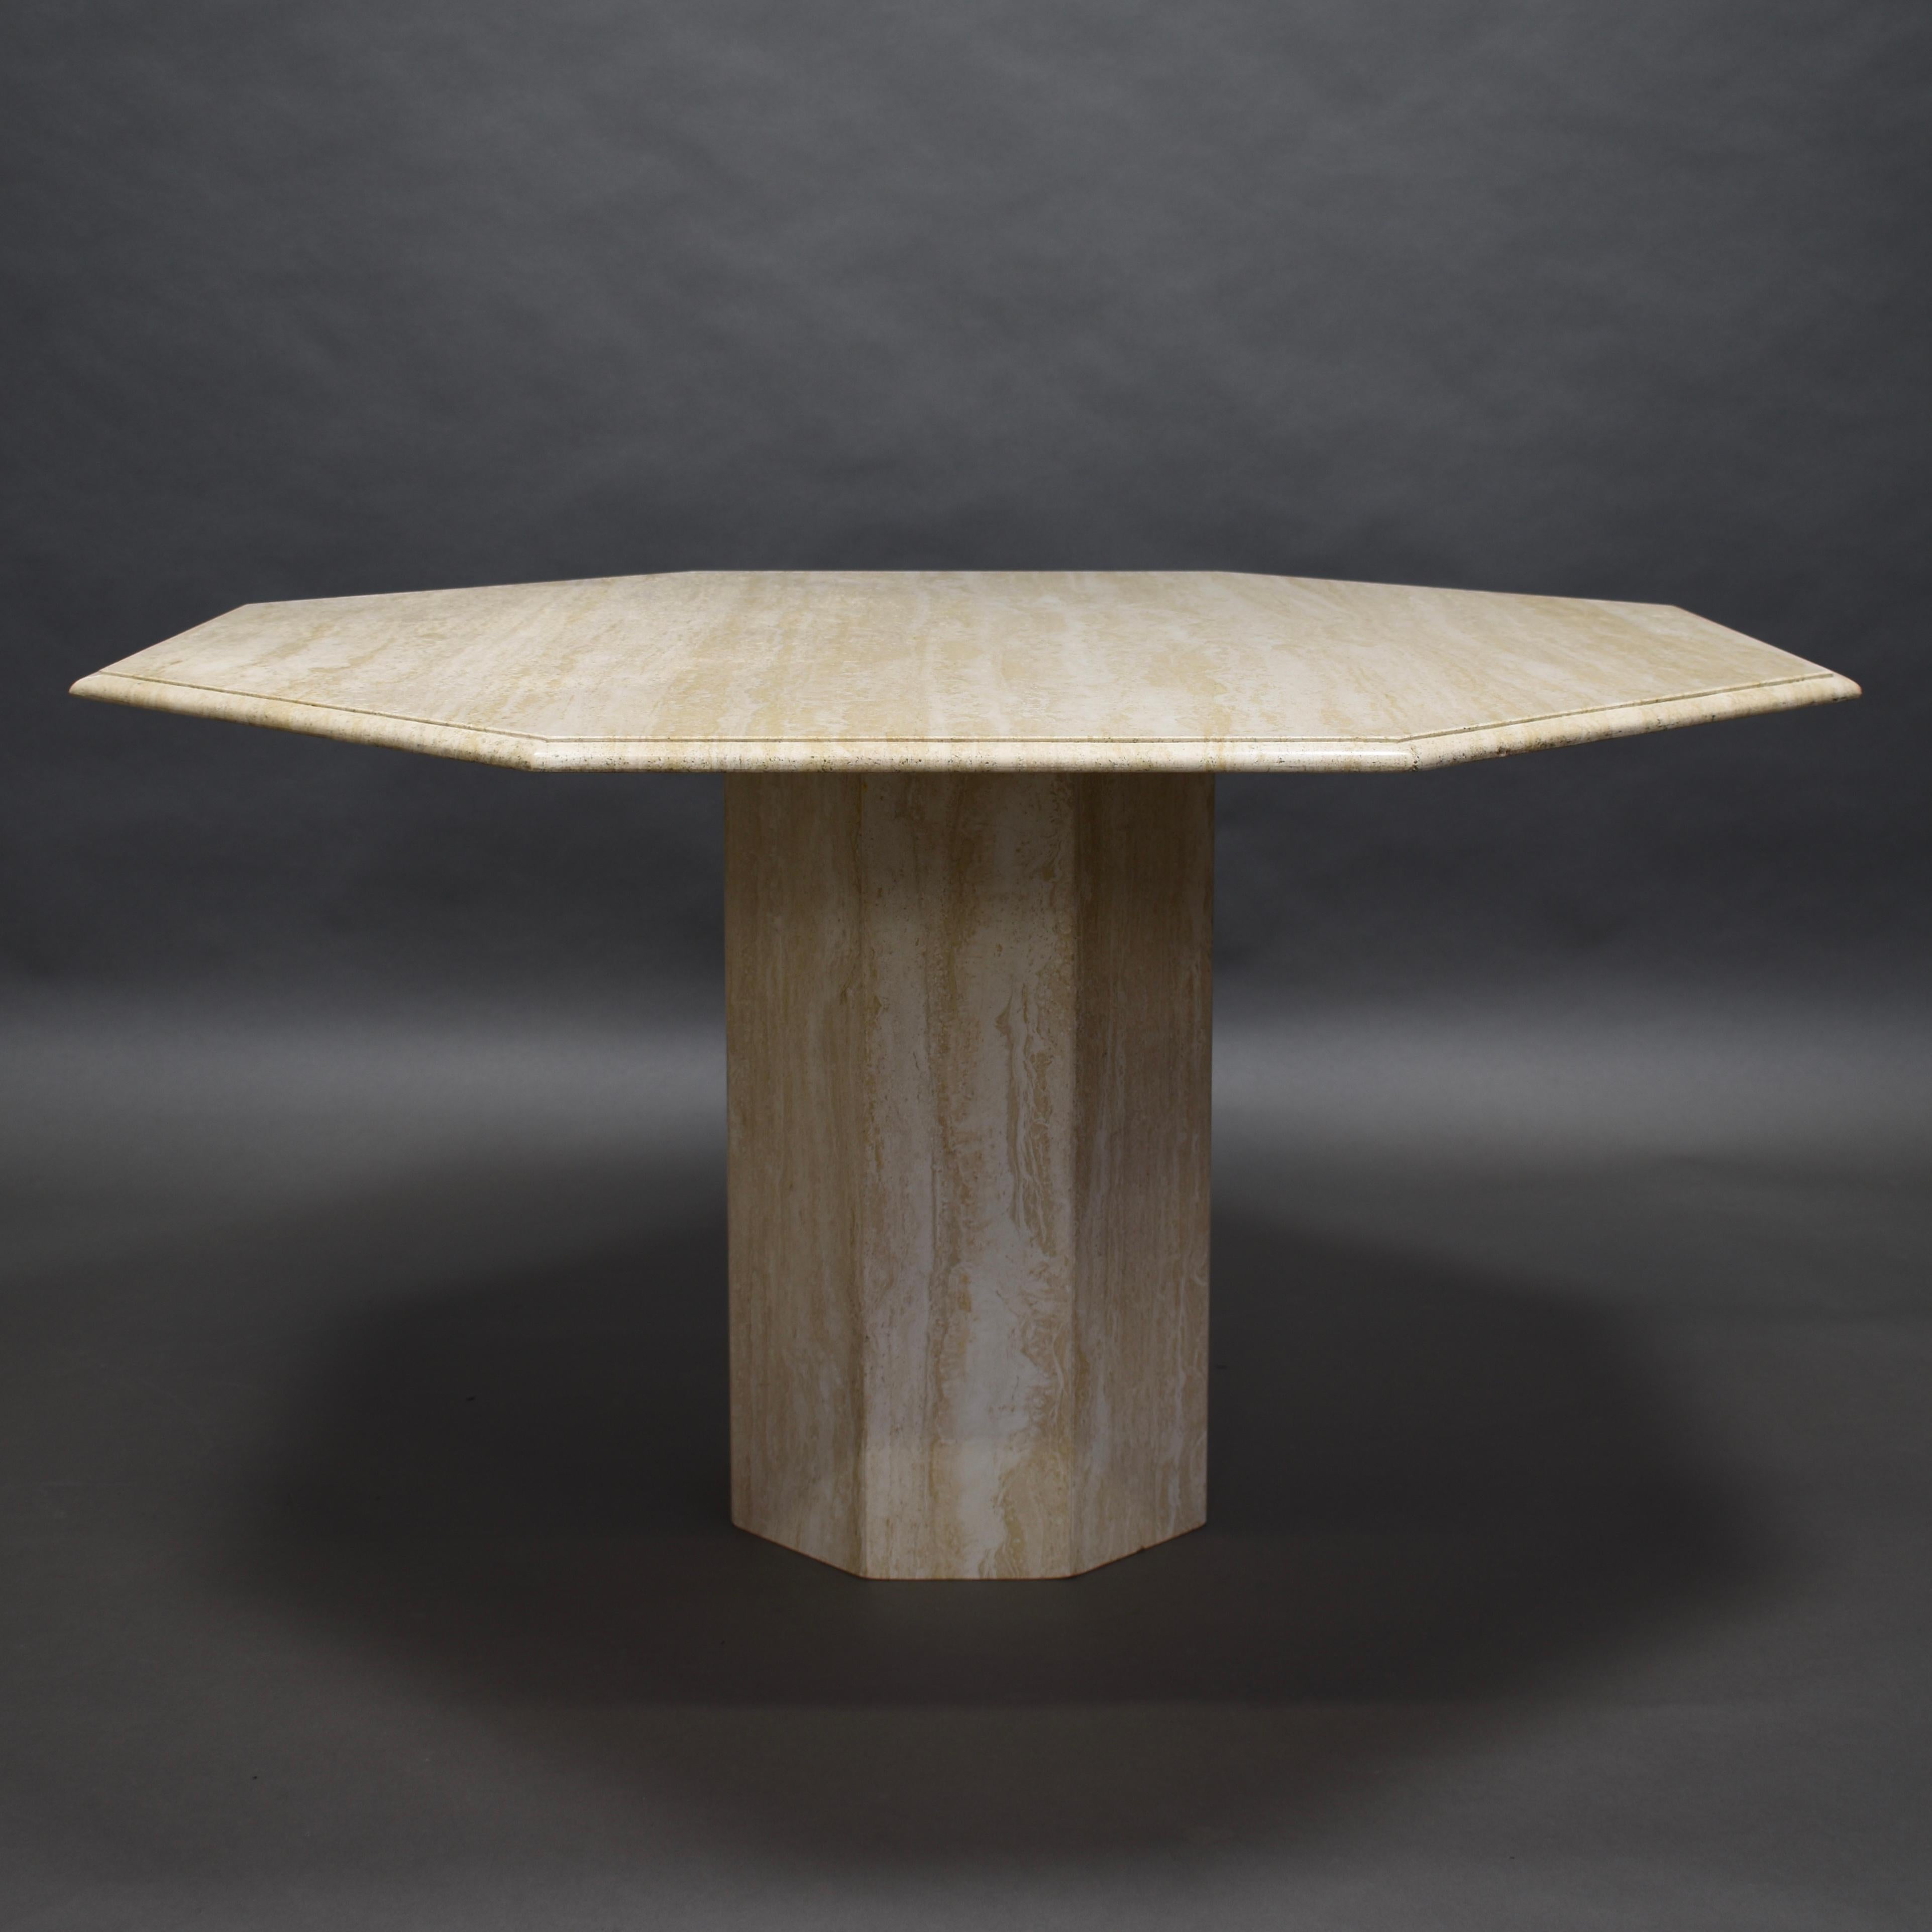 Elegant Italian travertine marble dining table from the 1970s.
The table is in very good condition with a few small damages to the edge of the table (see images).
Both the tabletop and base are octagonally shaped. The tabletop has a beautiful edge